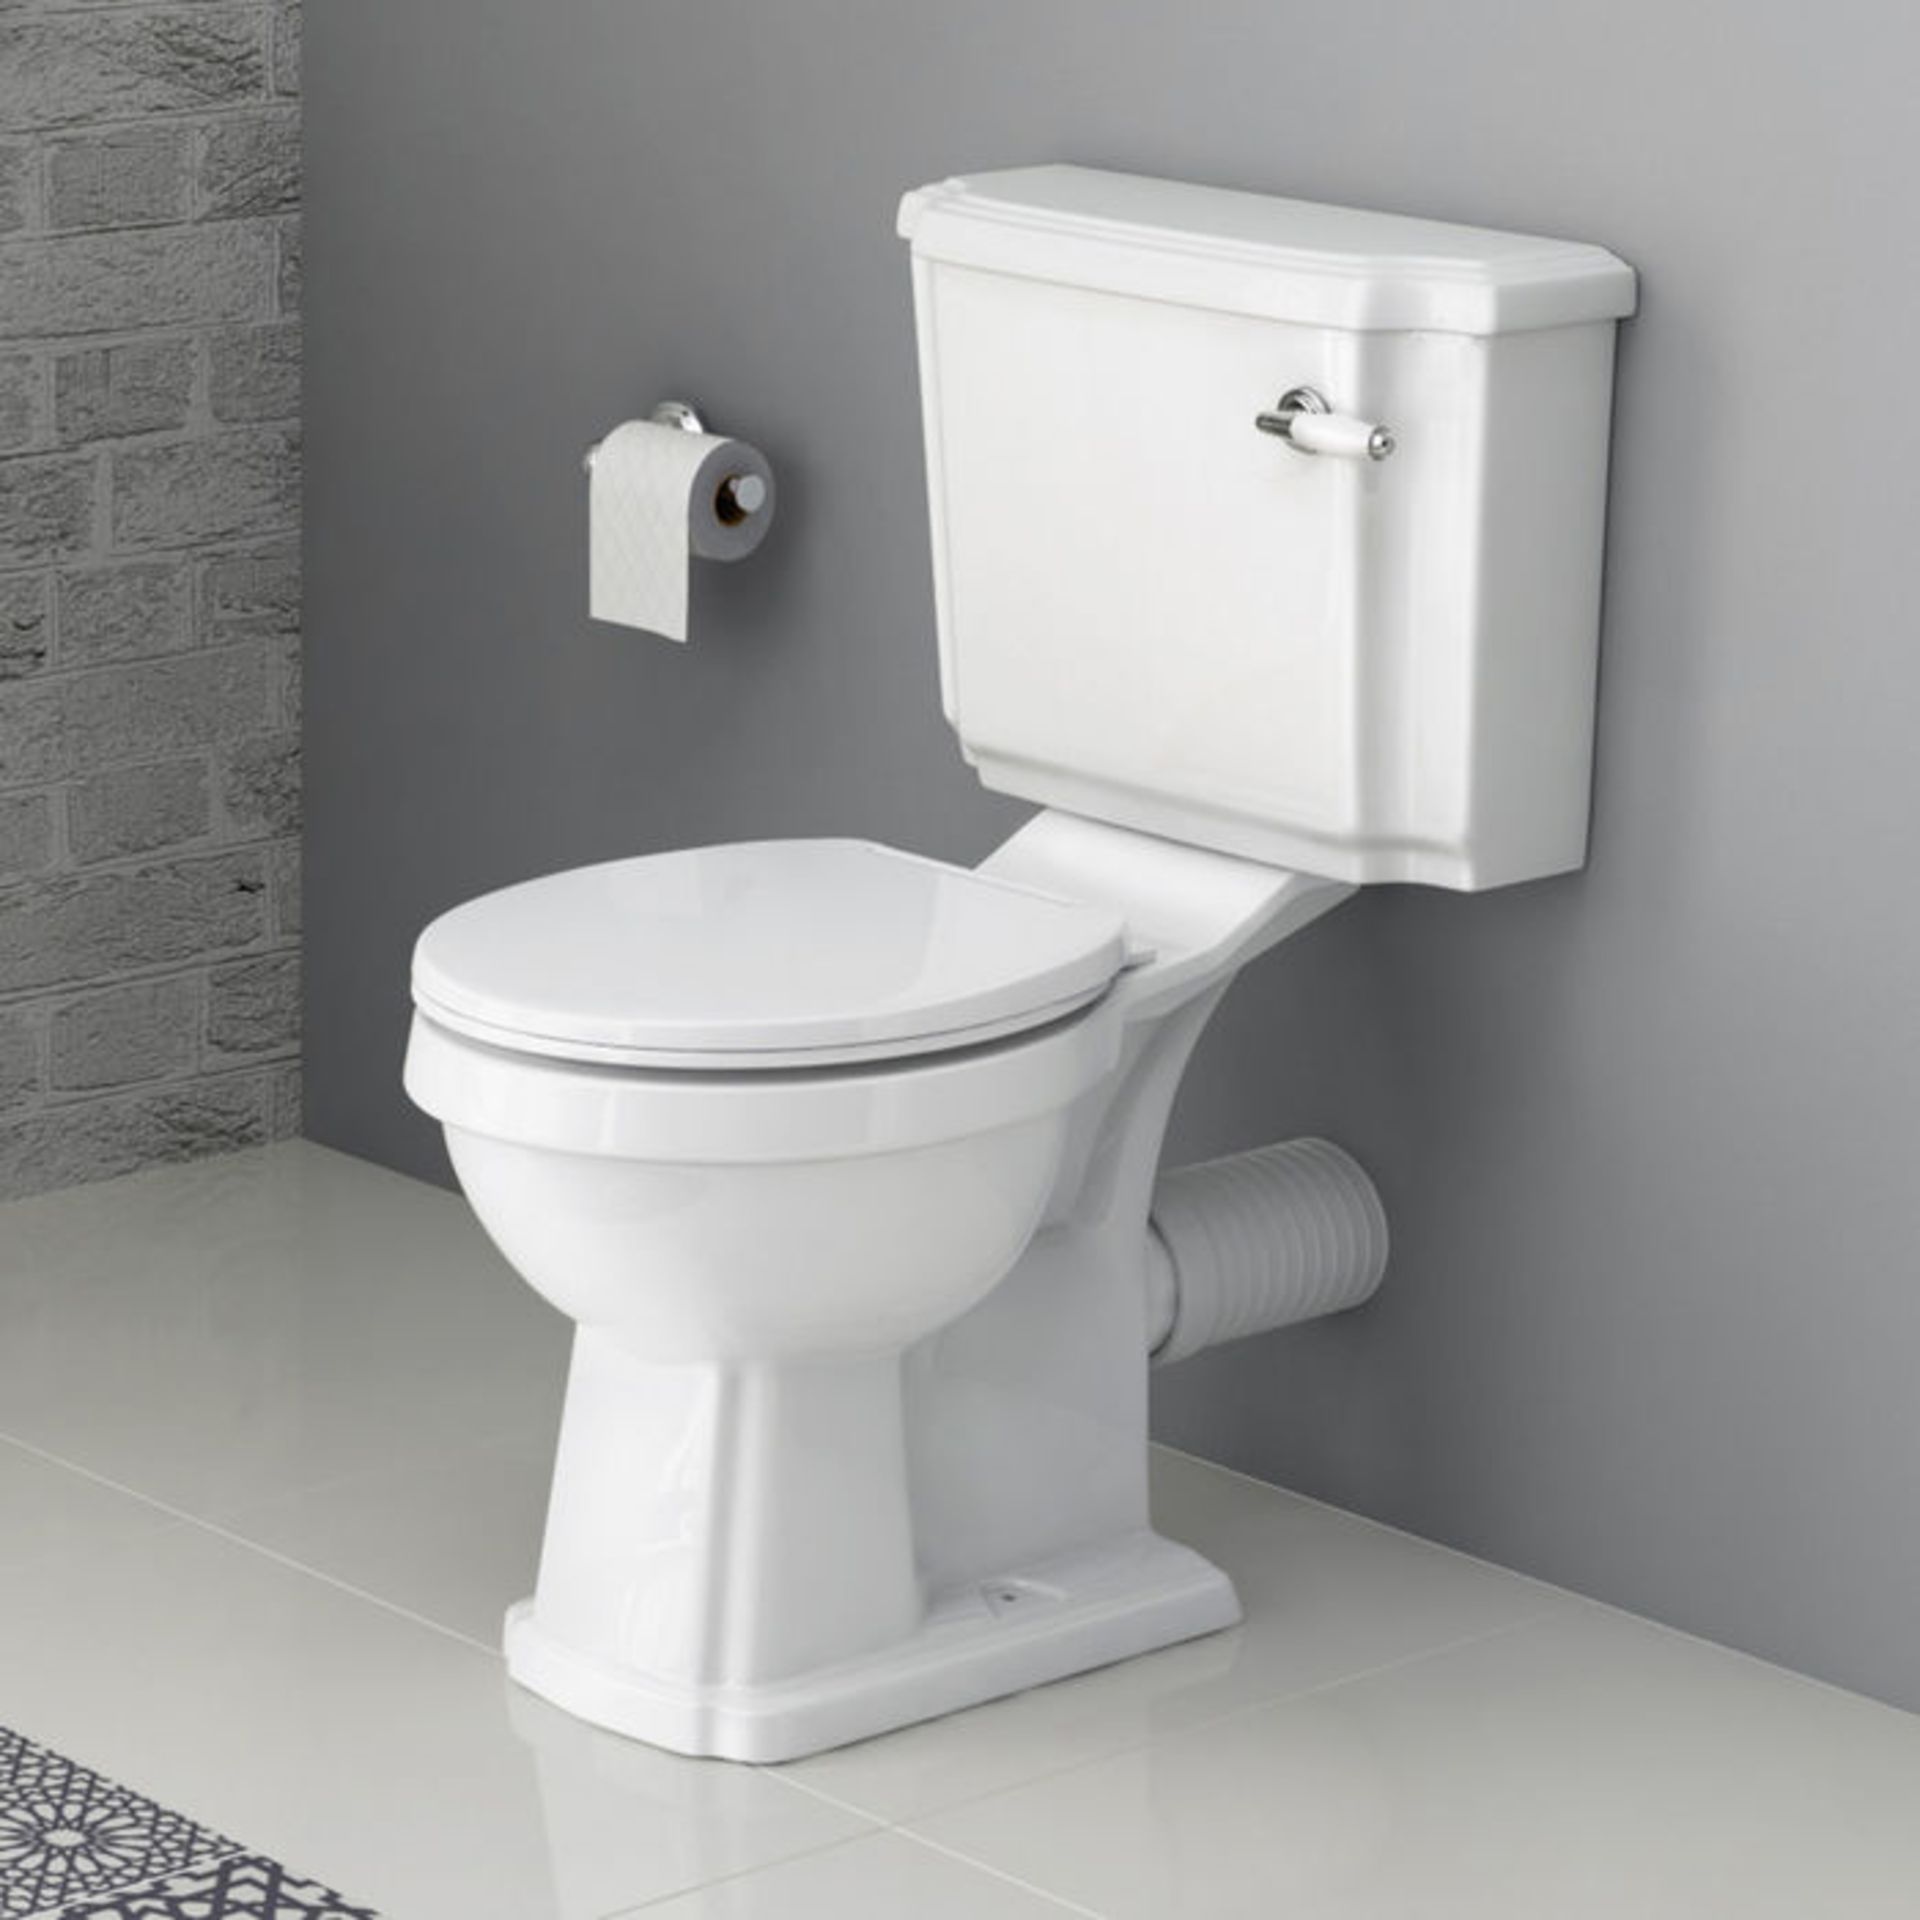 (OS242) Cambridge Traditional Close Coupled Toilet & Cistern - White Seat Traditional features add